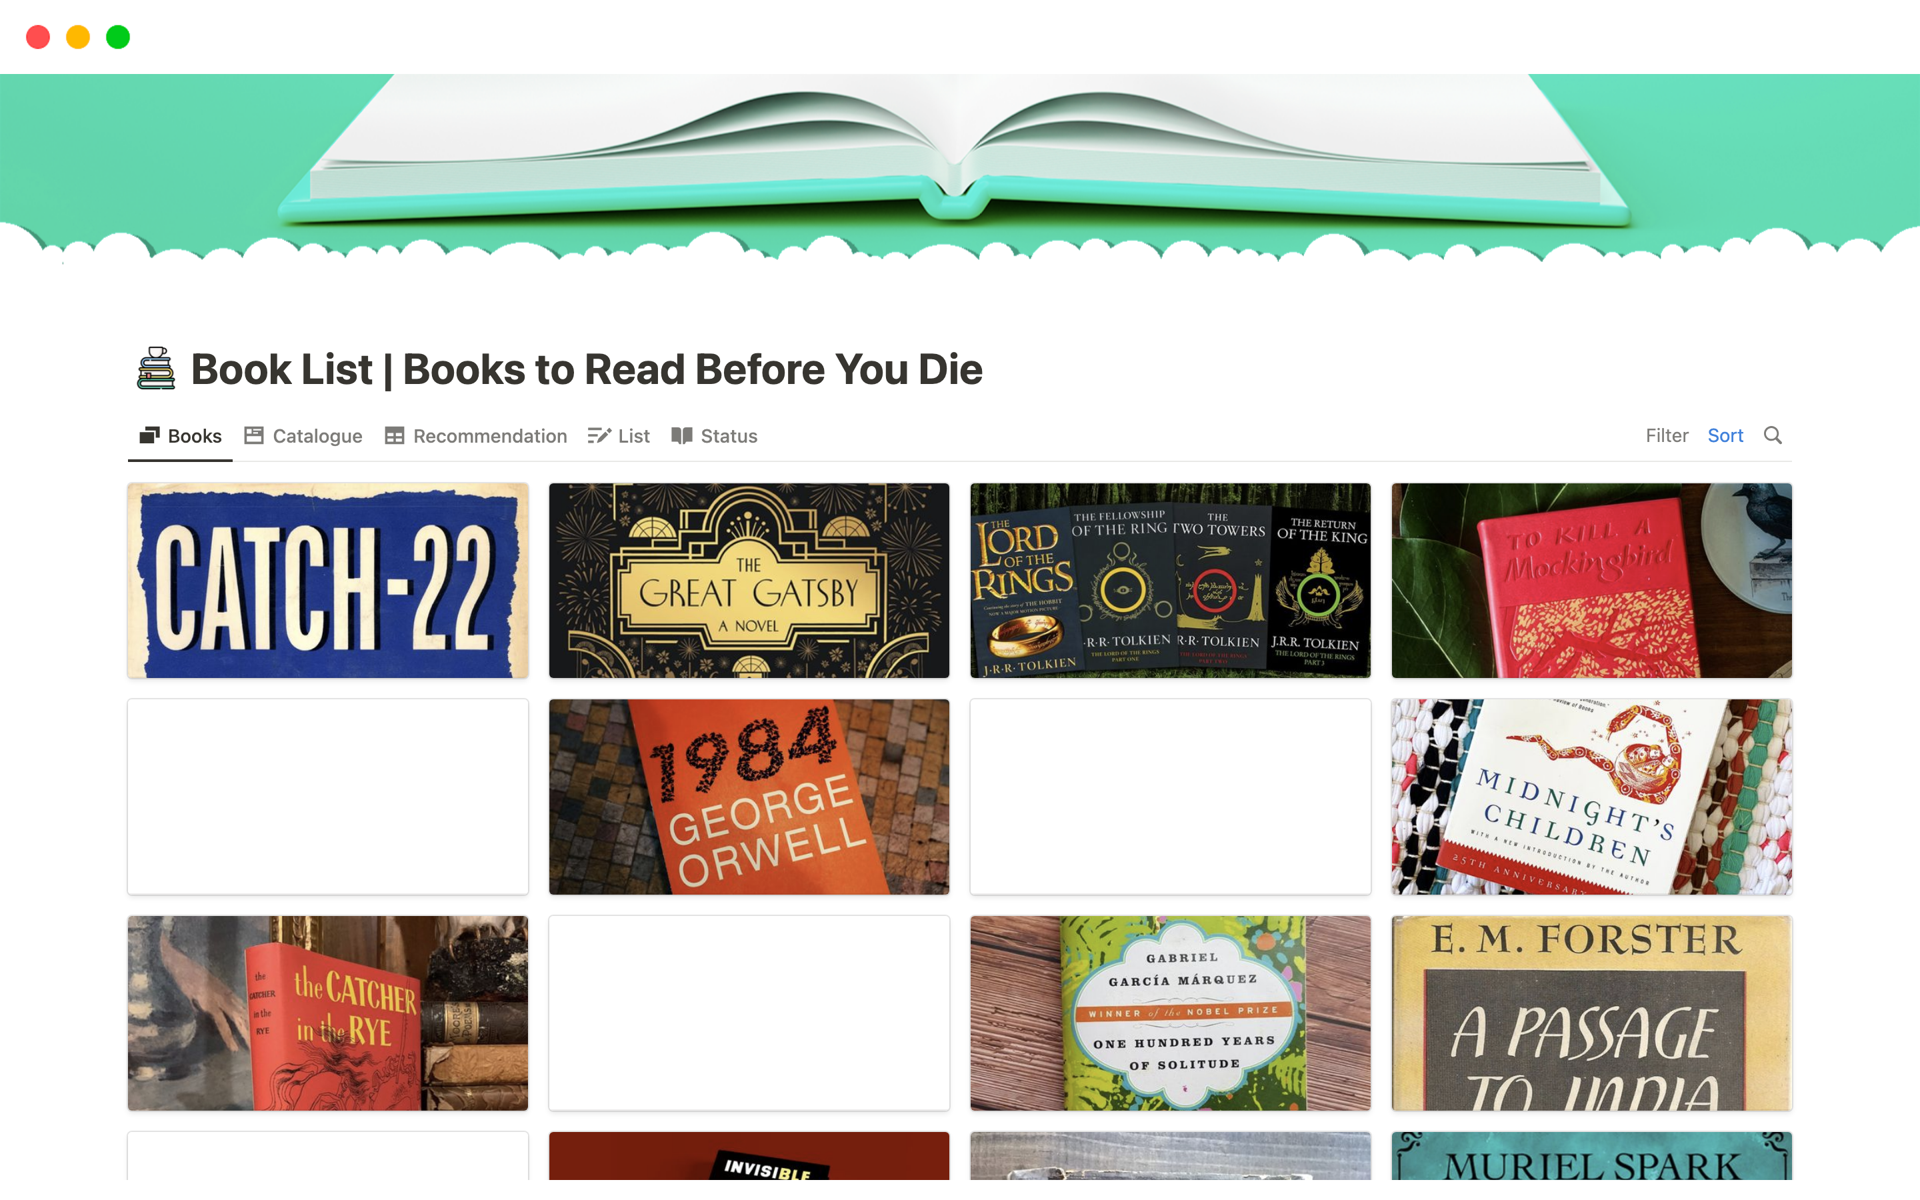 The ultimate book & reading list template containing 7 famous top-100 book lists' 457 unique titles with all their data and cover for a "must-read books before you die" challenge and keeping track of your own library as well.